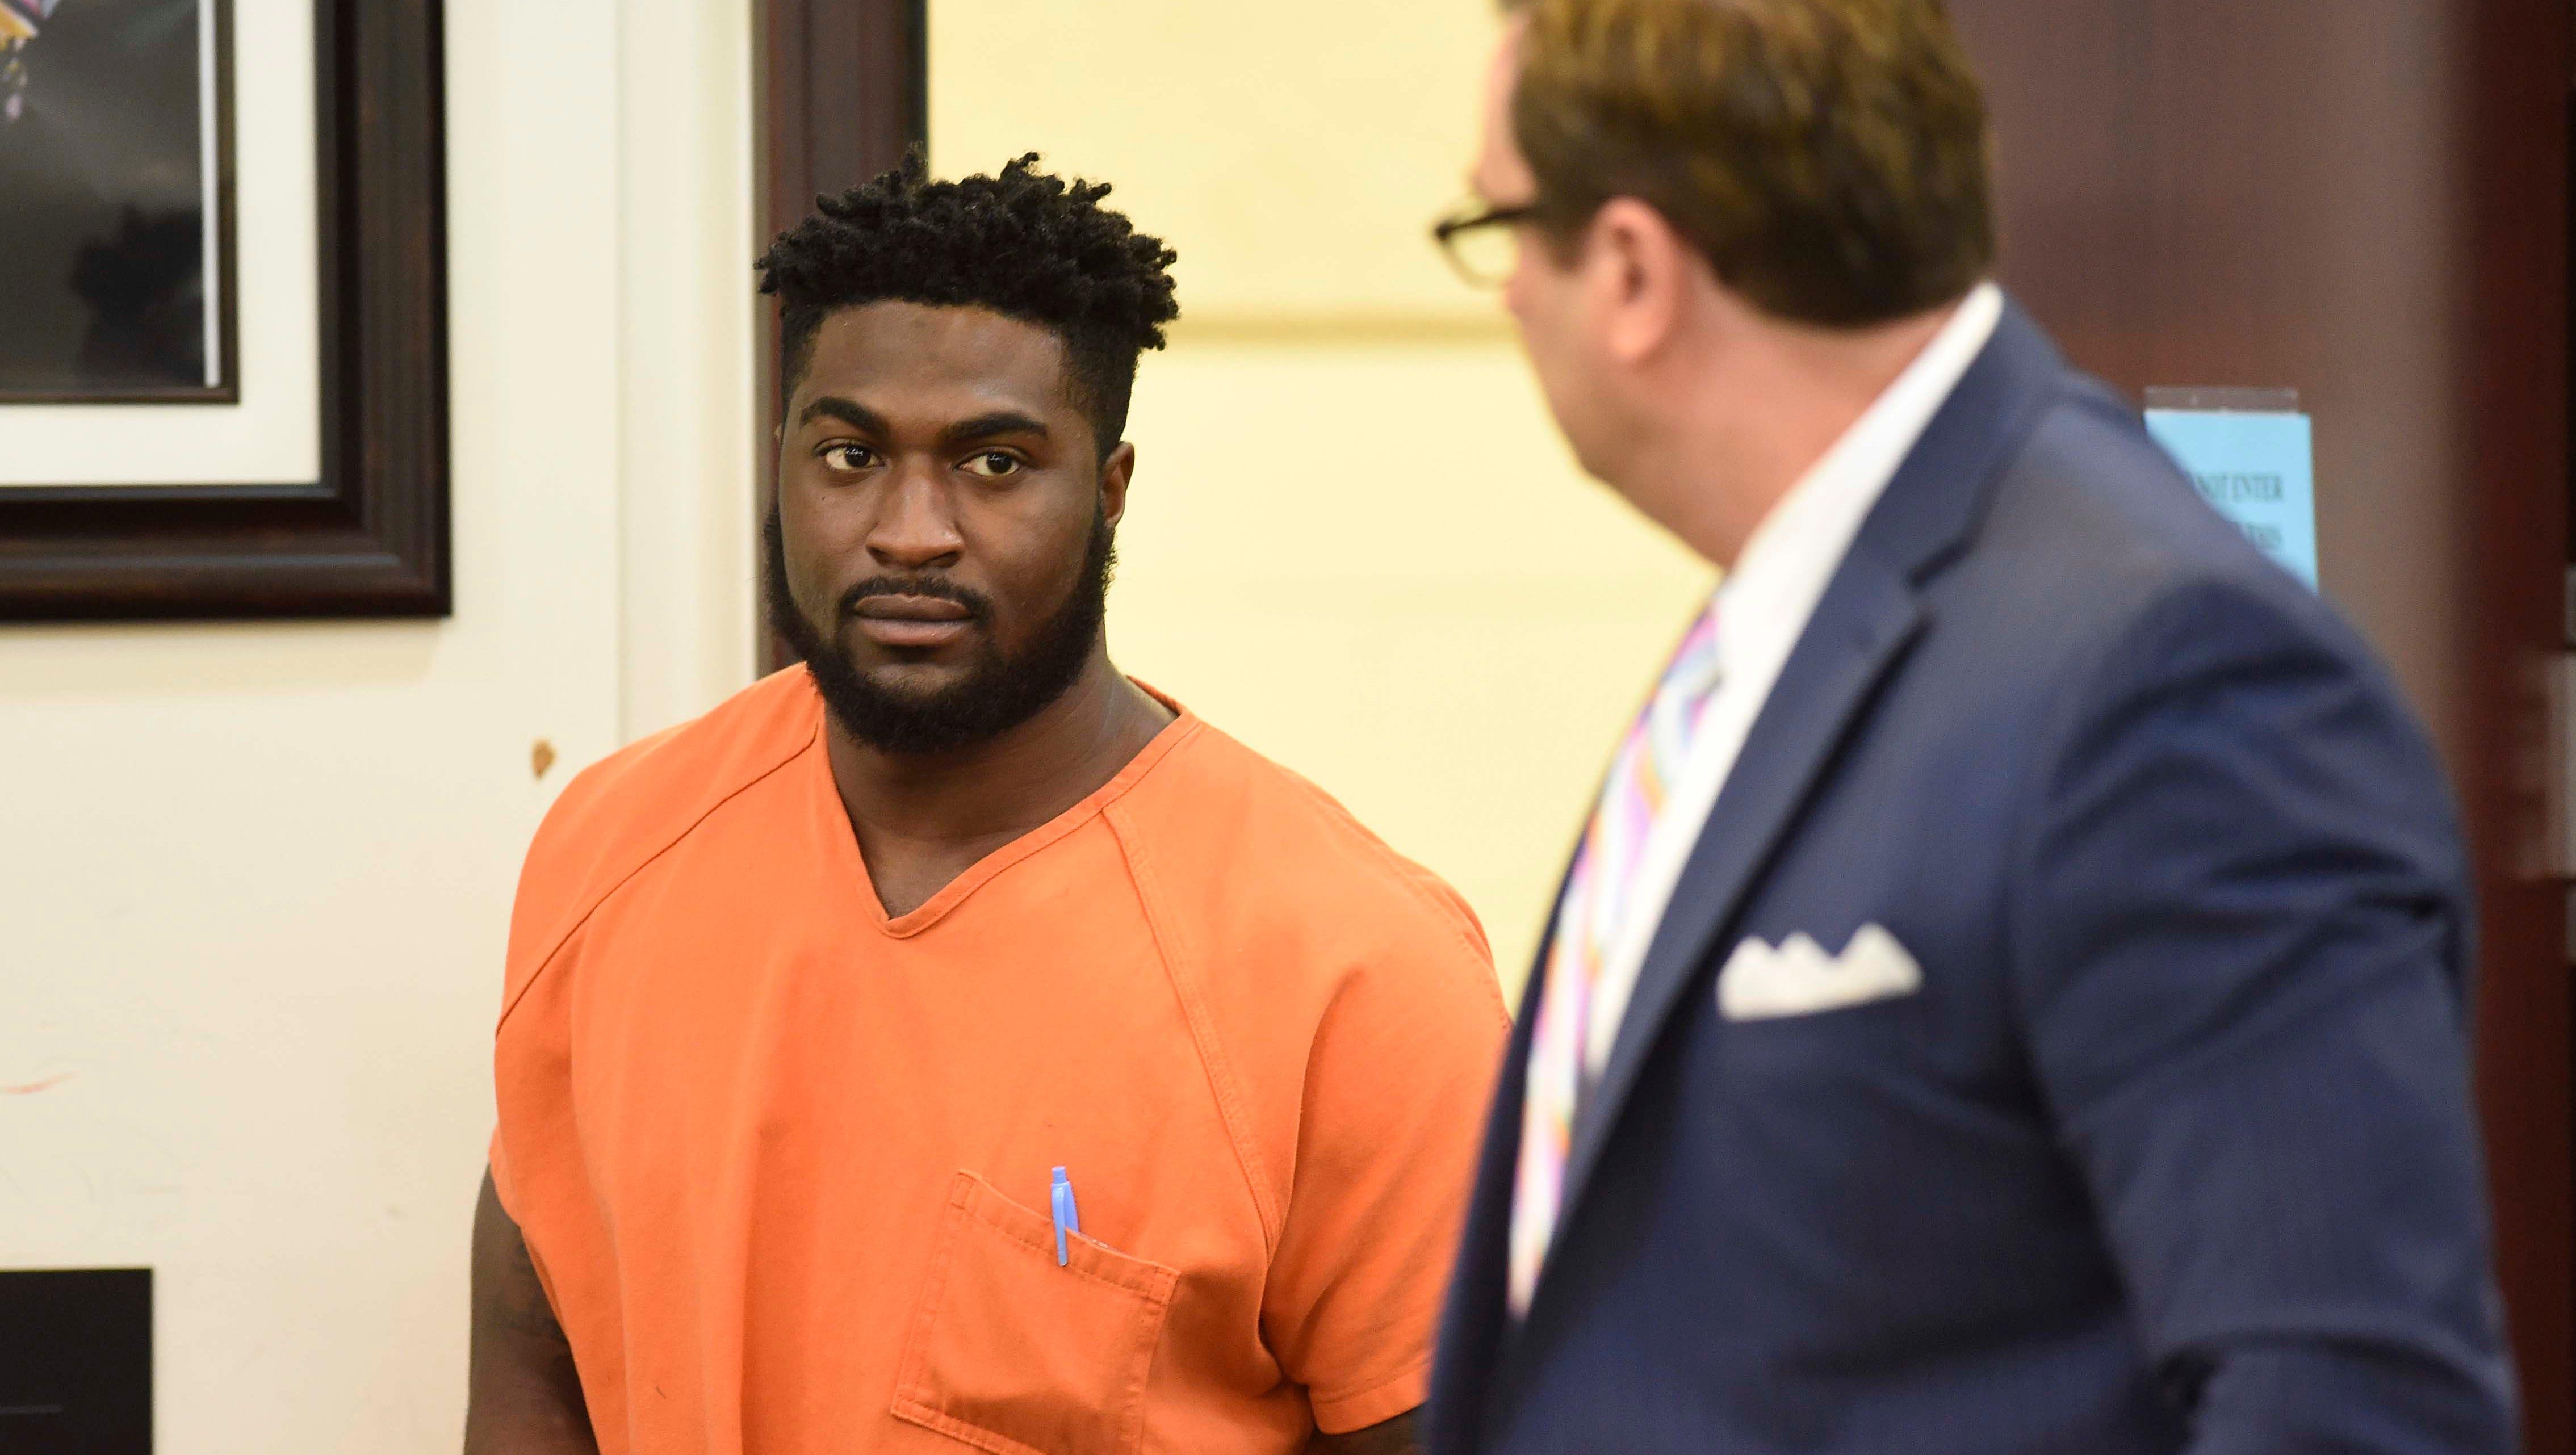 Cory Batey makes his way in court for his sentencing hearing in Judge Monte Watkins